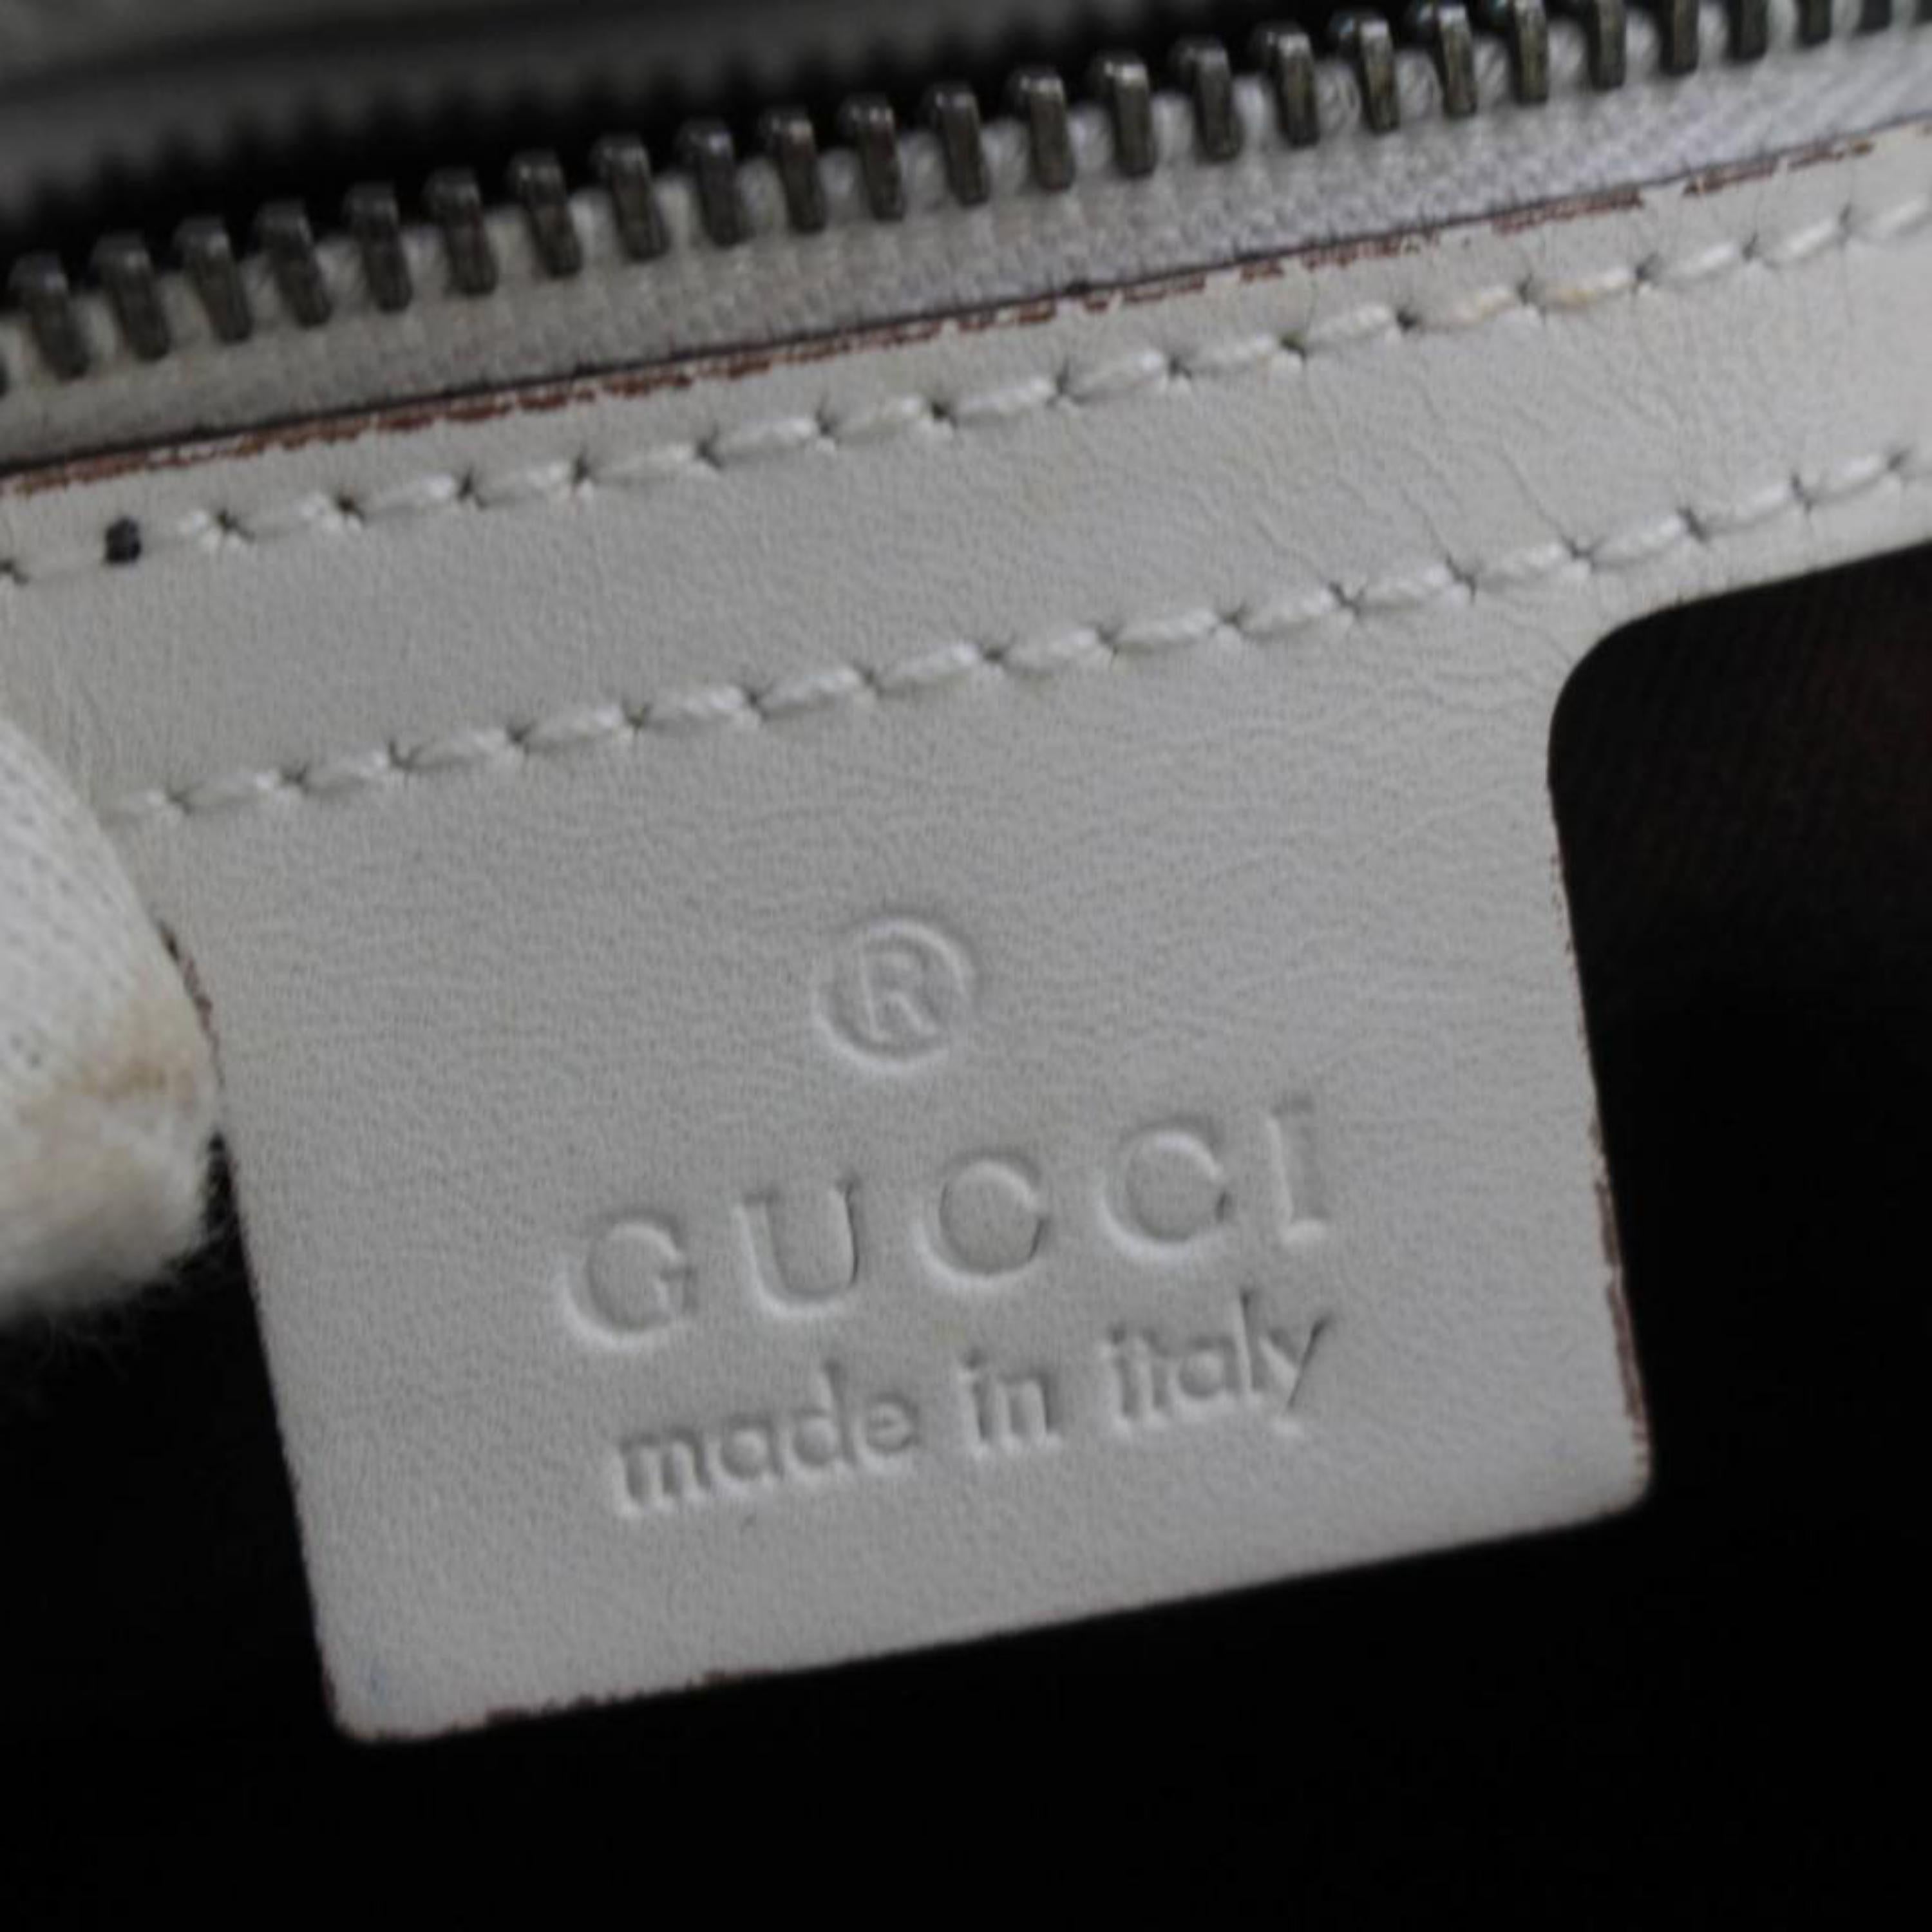 Gucci Large Monogram Gg Belt Buckle 868903 White Canvas Tote In Good Condition For Sale In Forest Hills, NY